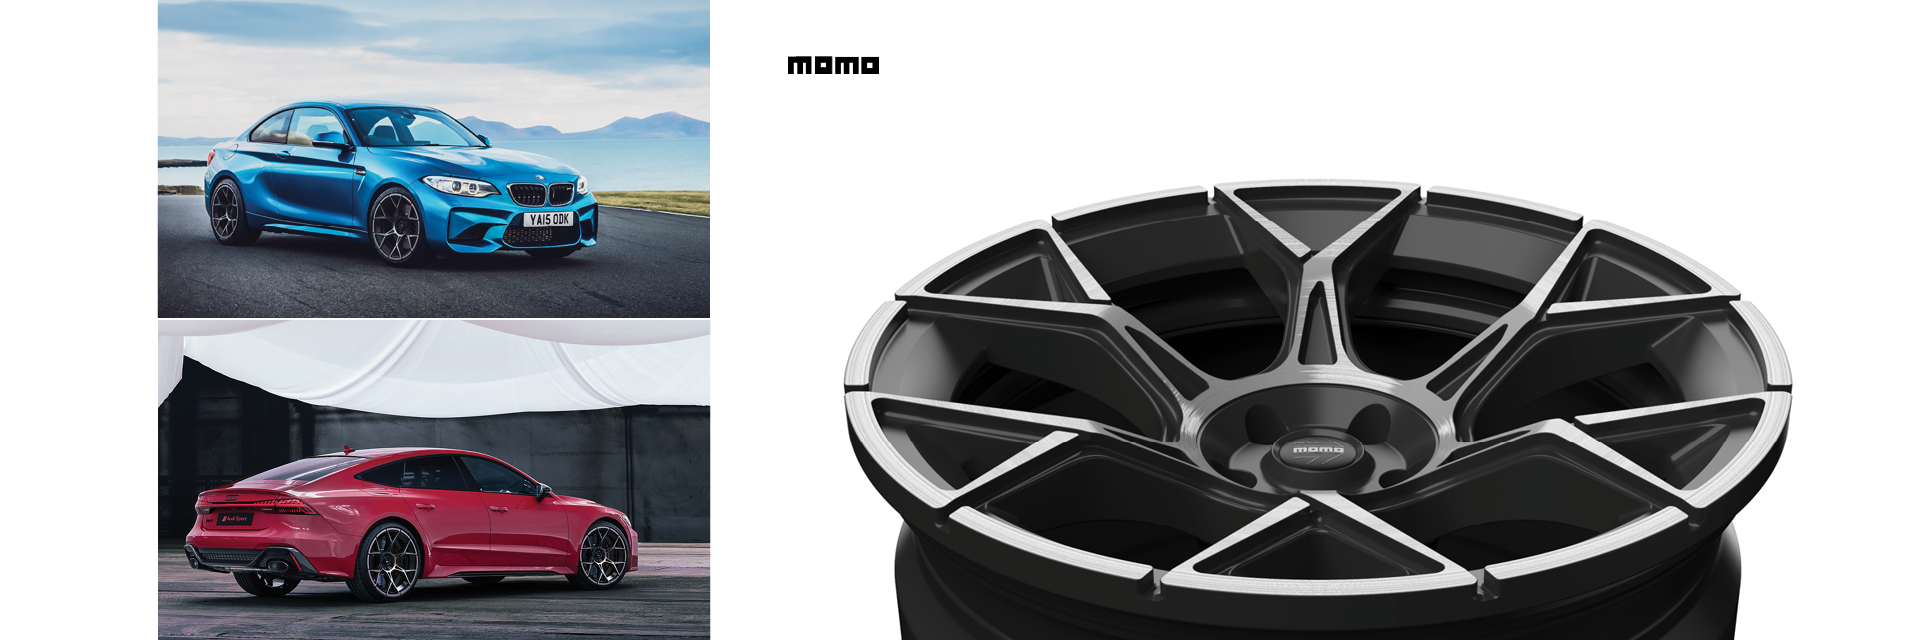 Large render of a tire wheel, as well as renderings of that wheel set in different cars. 